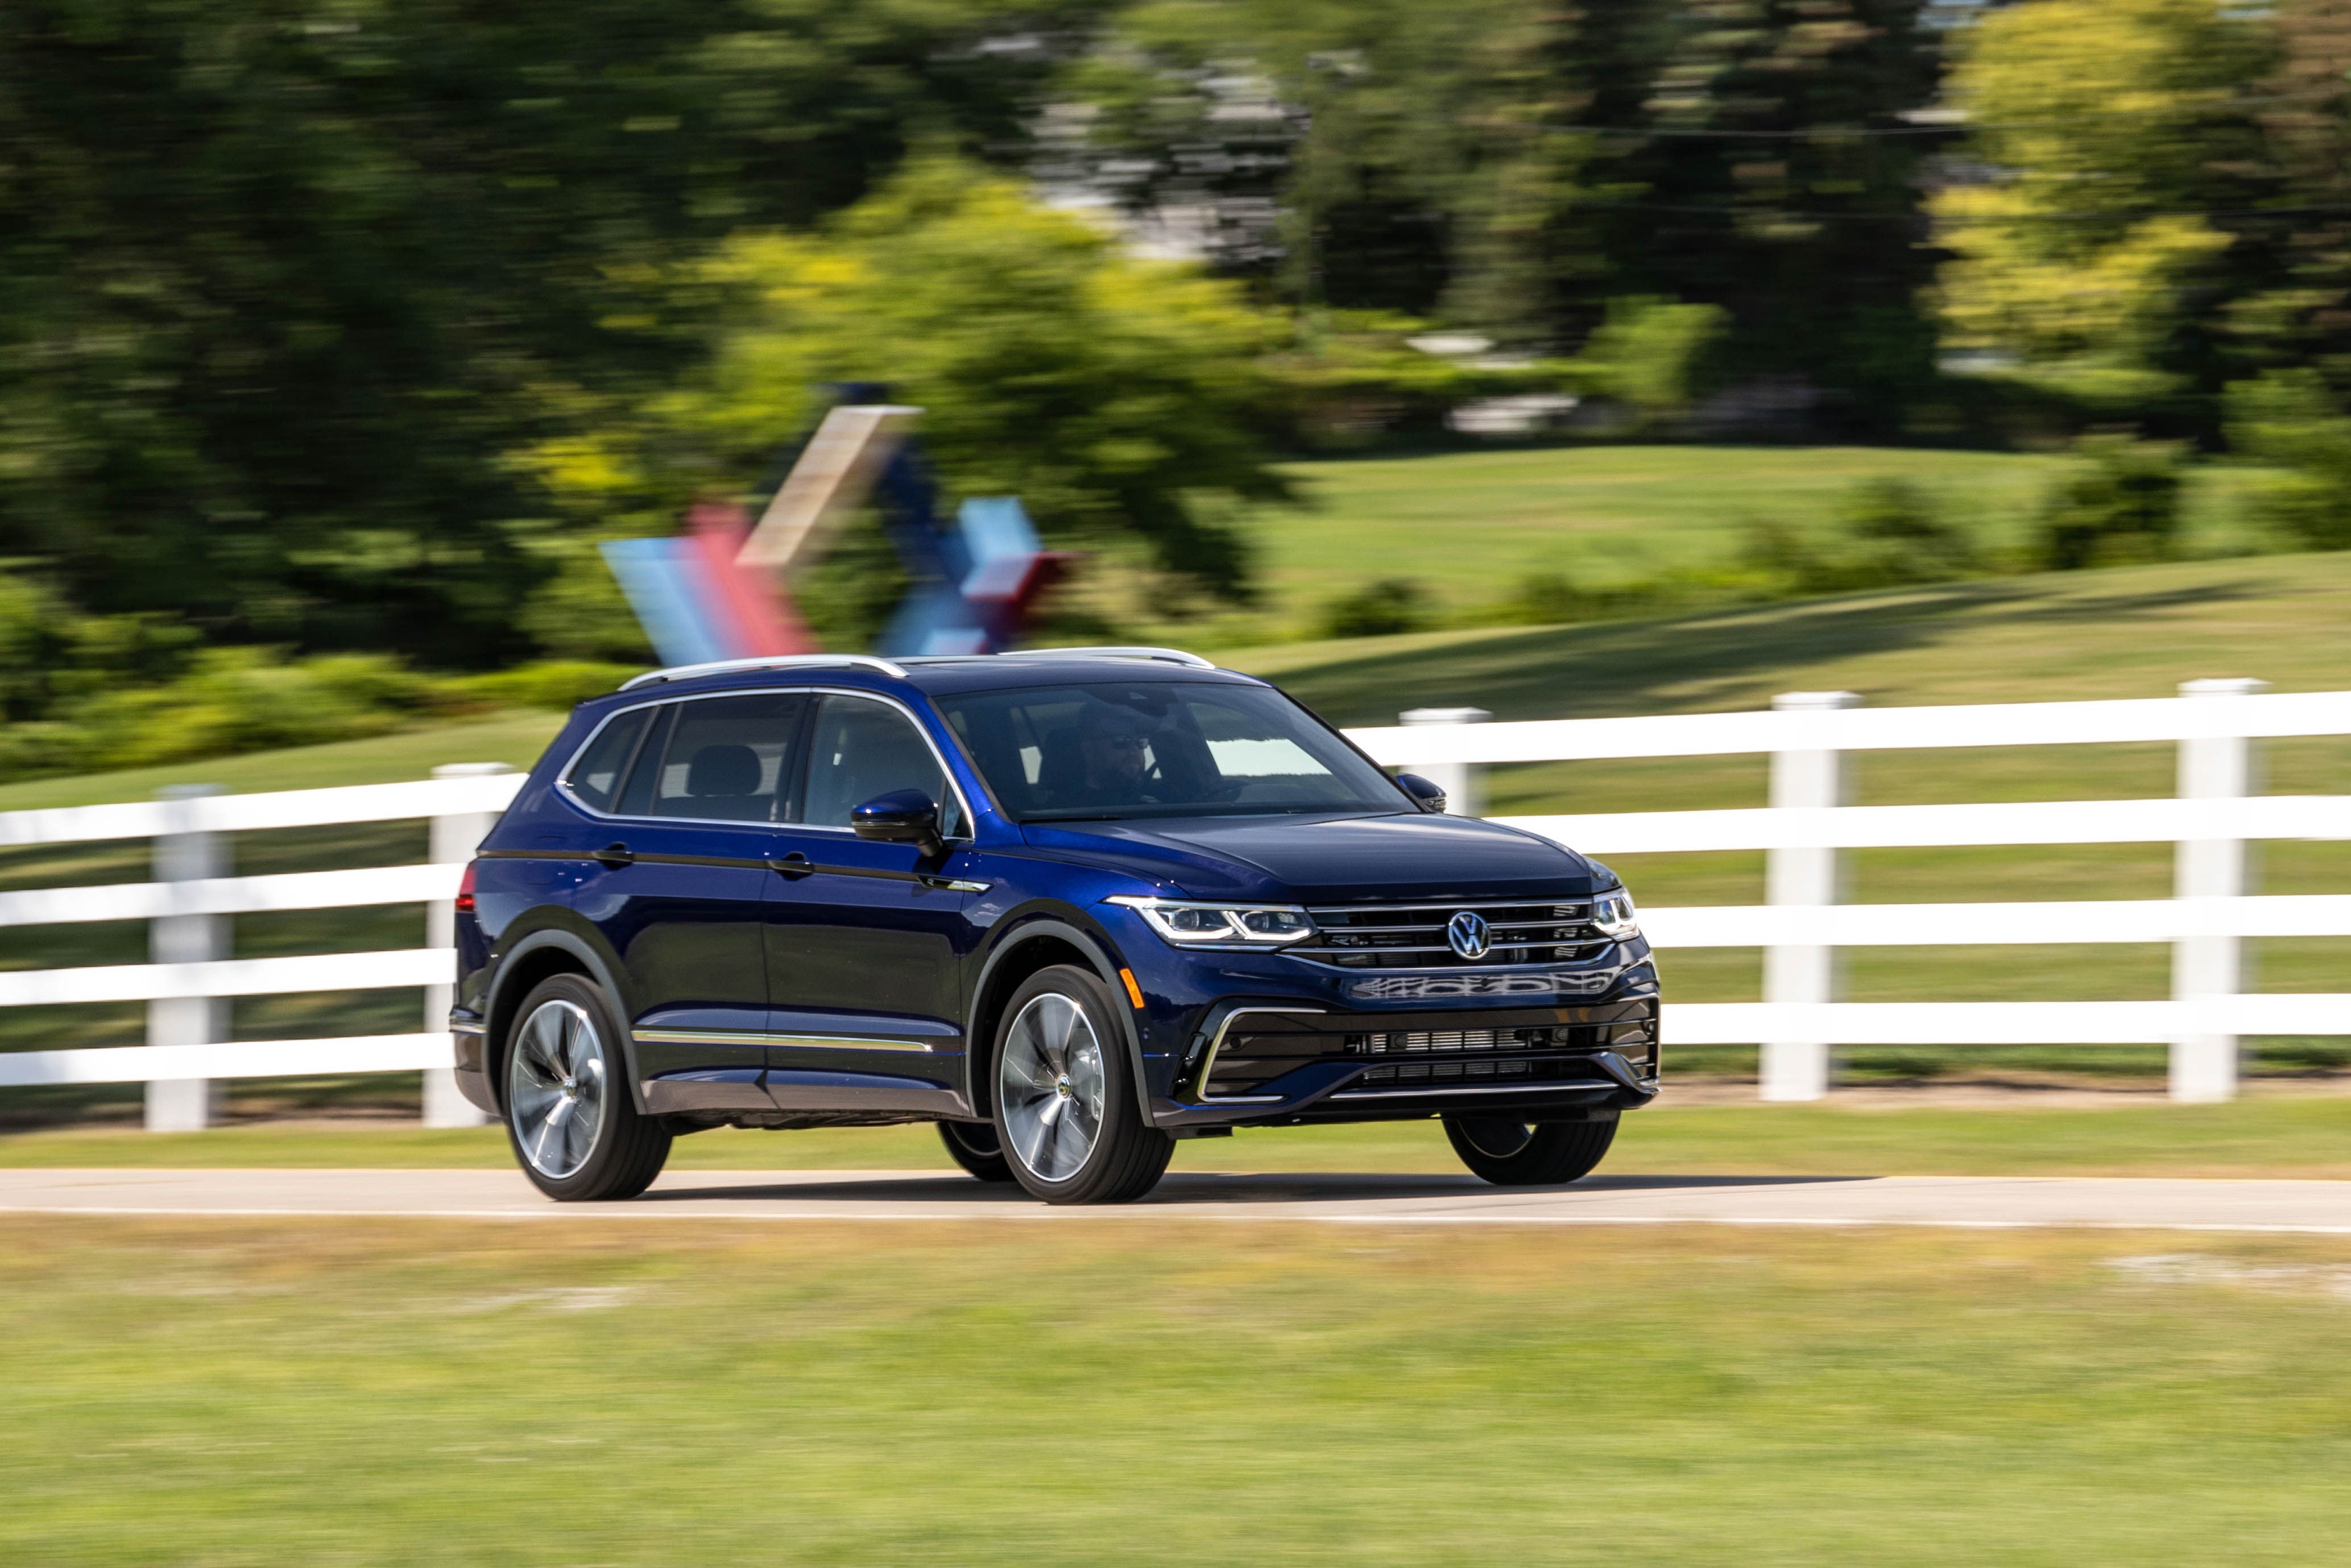 2022 Volkswagen Tiguan First Drive Review: Stick To Your Guns